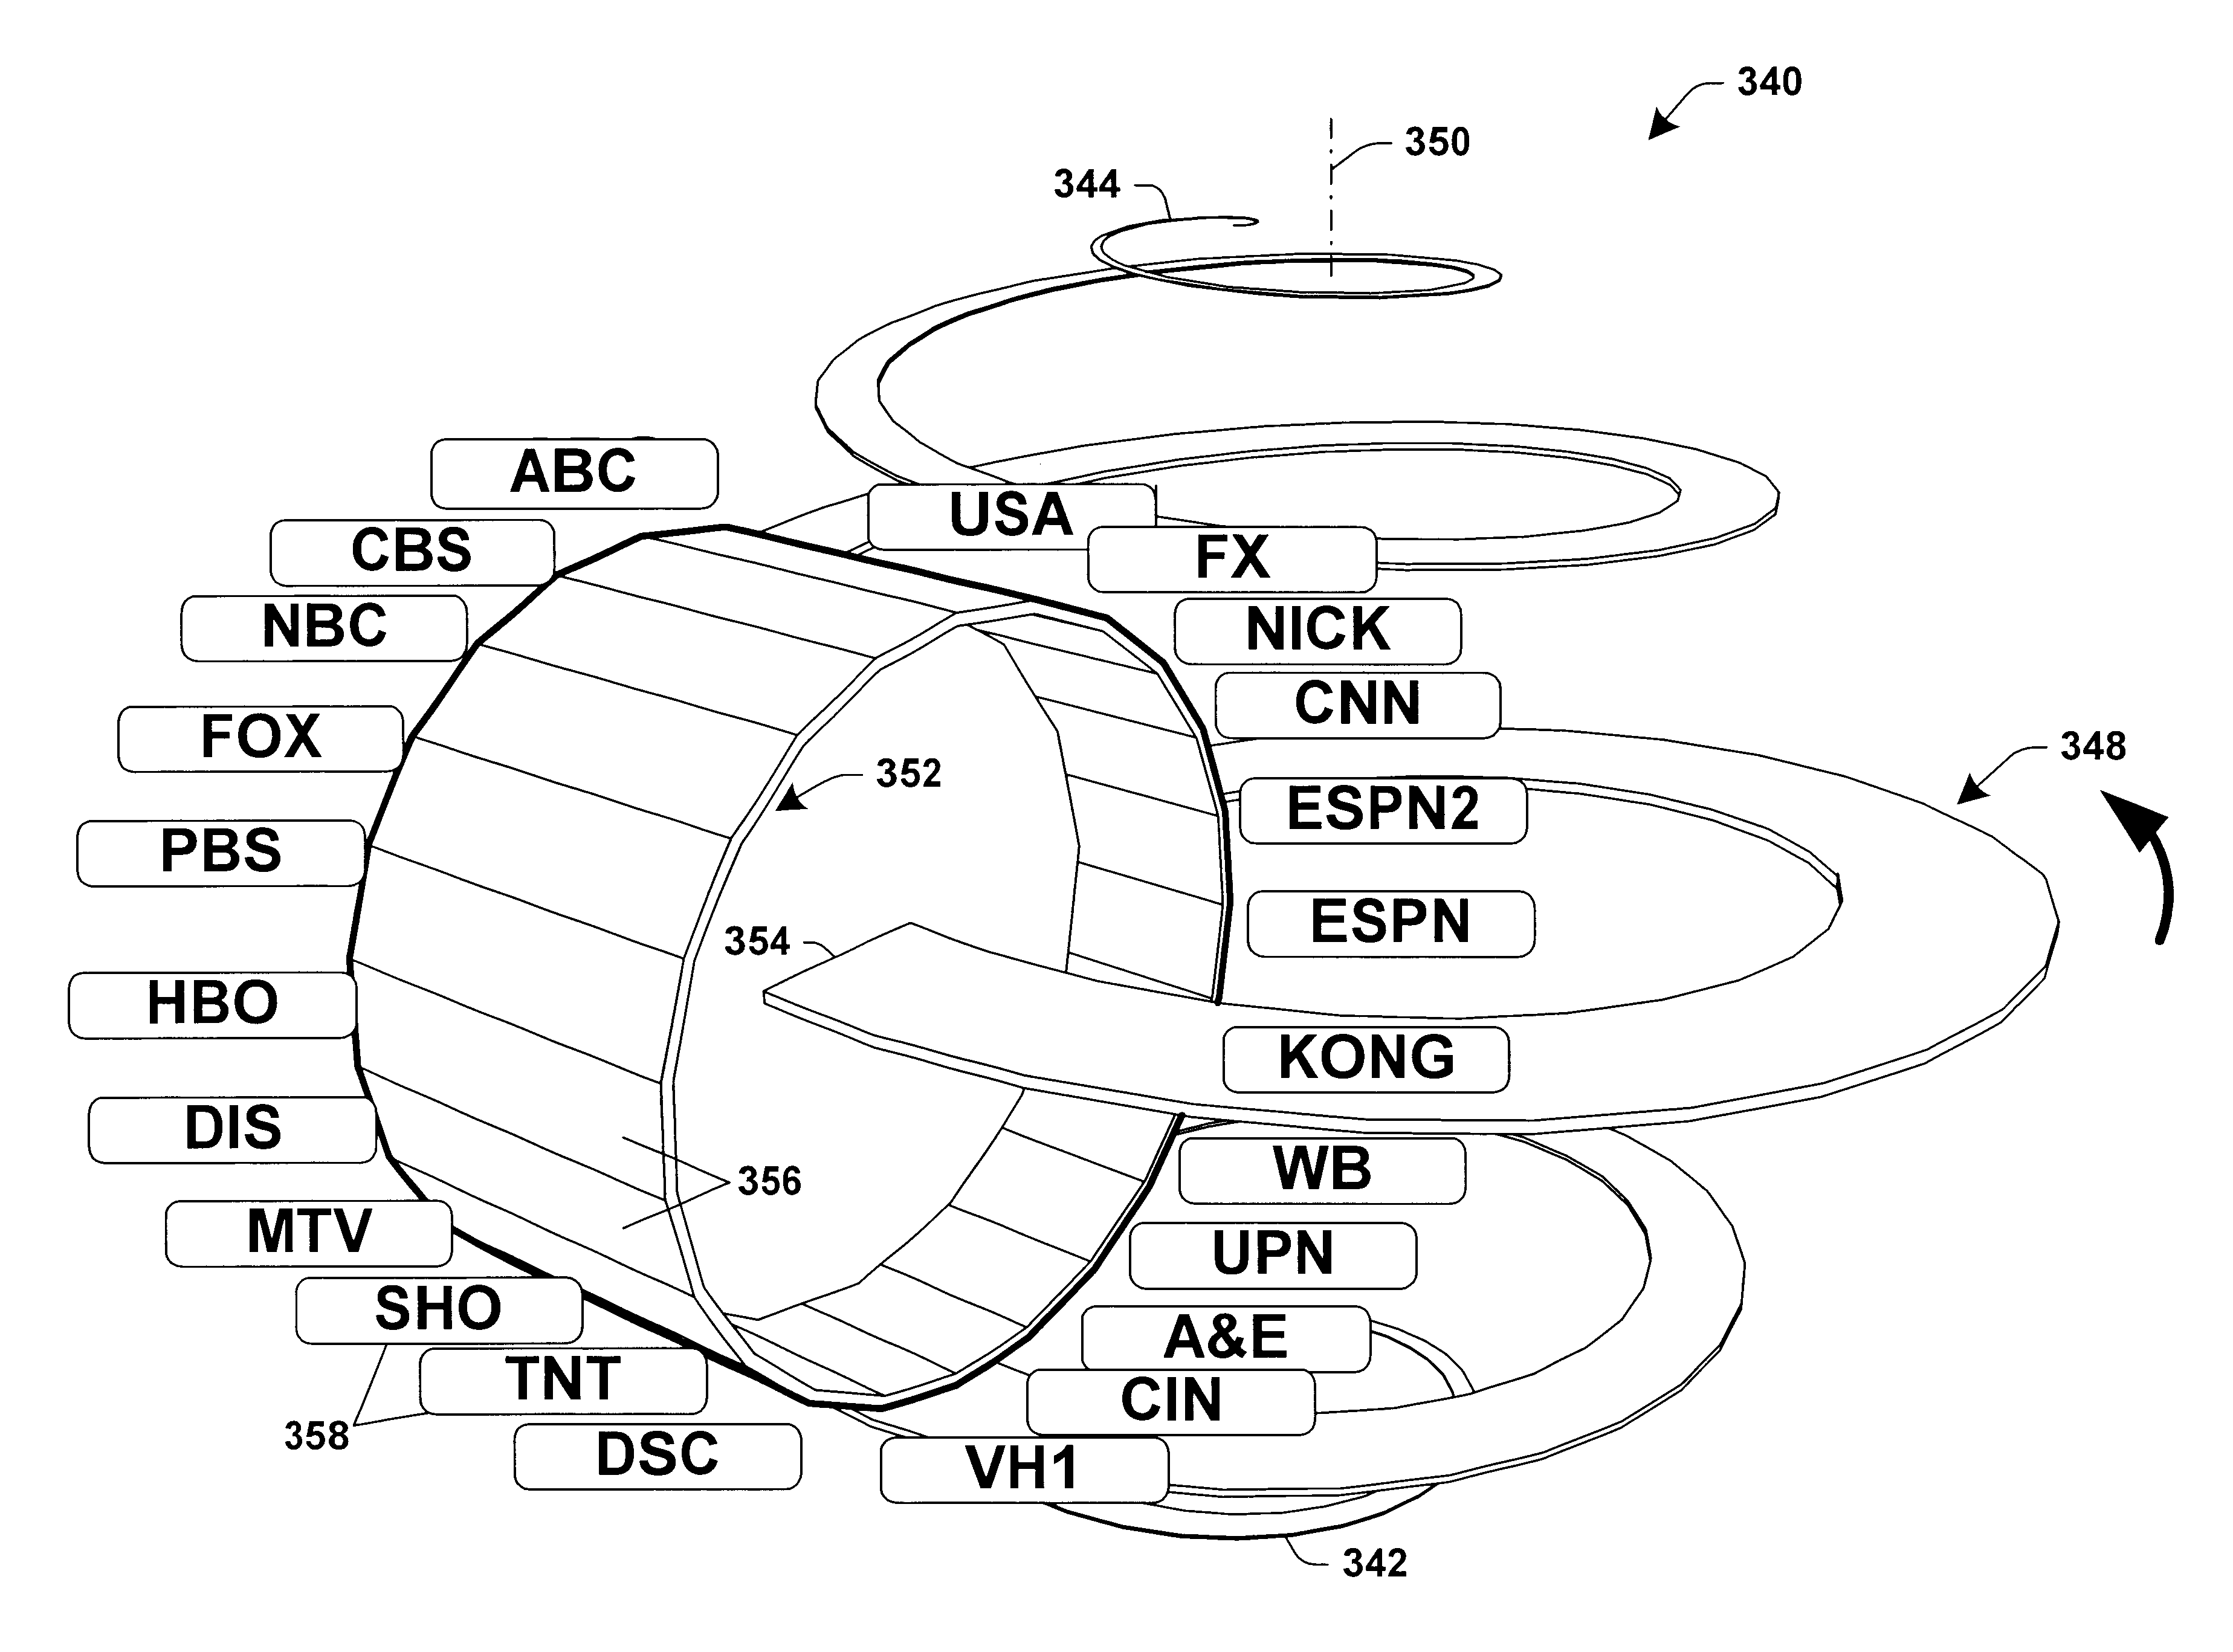 Visualization of multi-dimensional data having an unbounded dimension